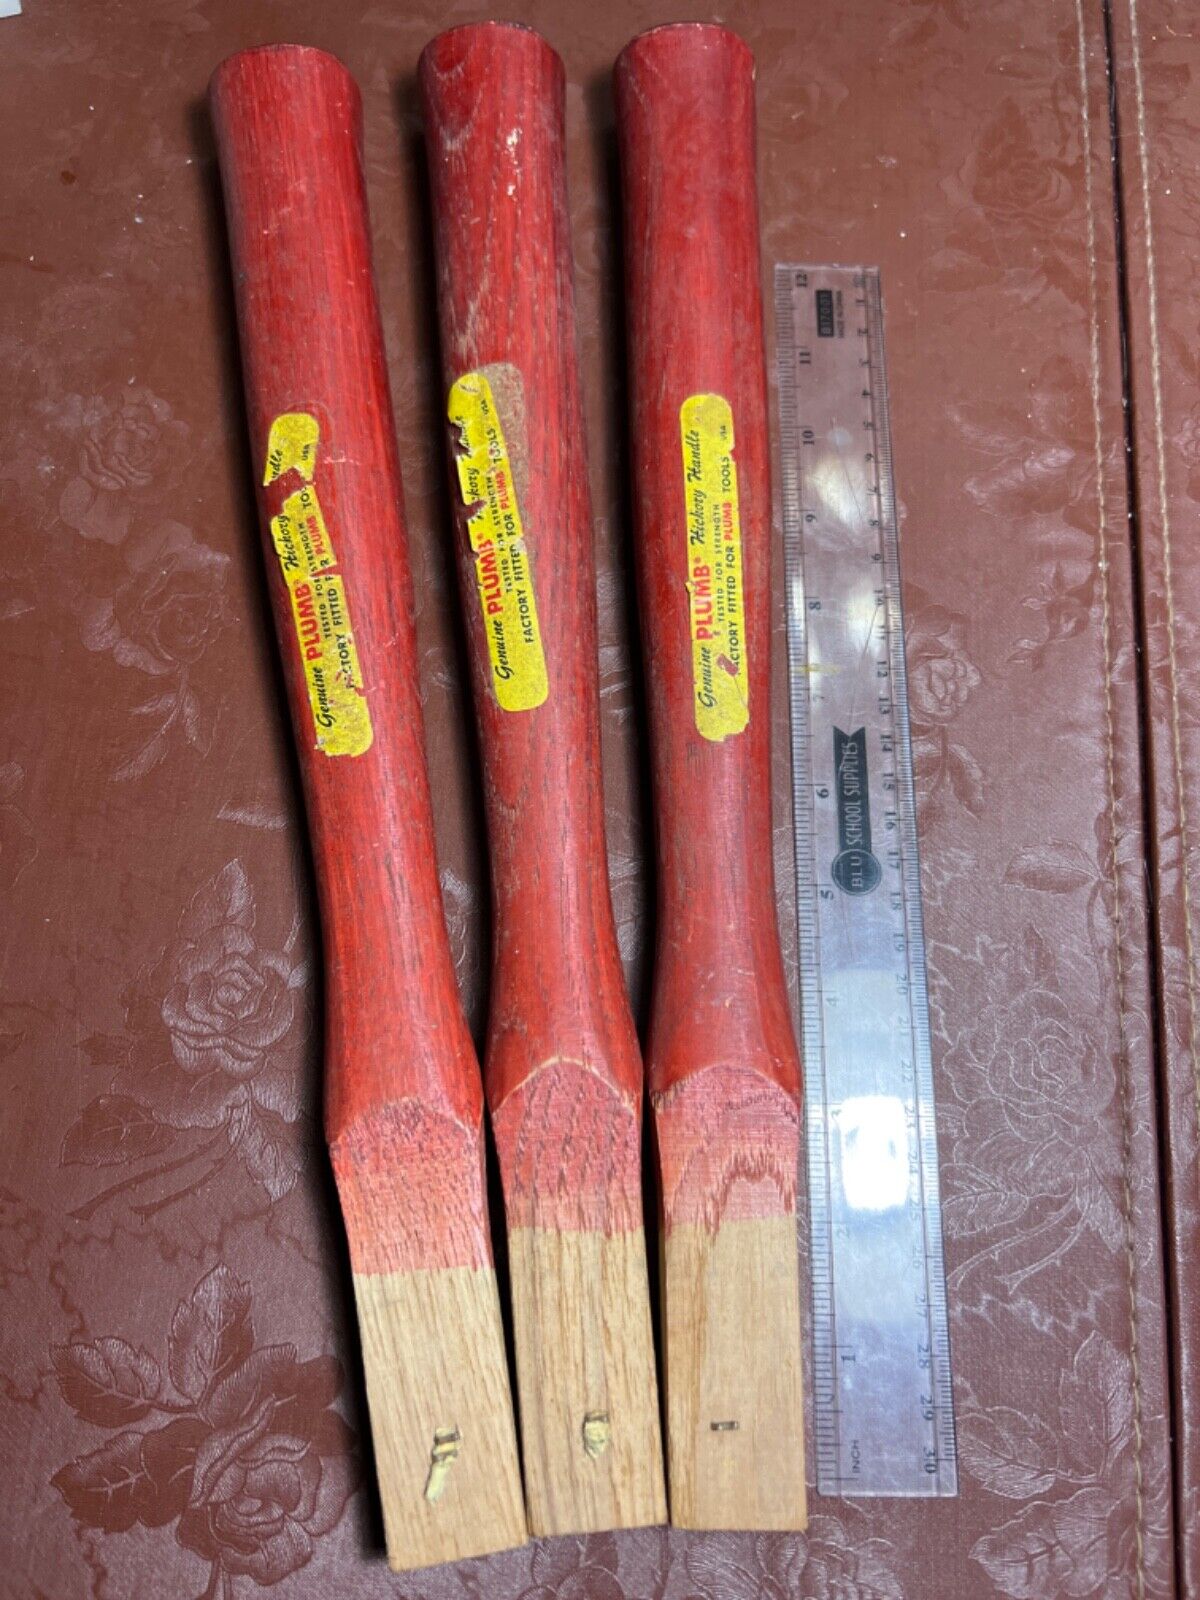 Lot of 3 Vintage NOS Plumb Hickory Wood Hammer Tool Handles. Made in USA